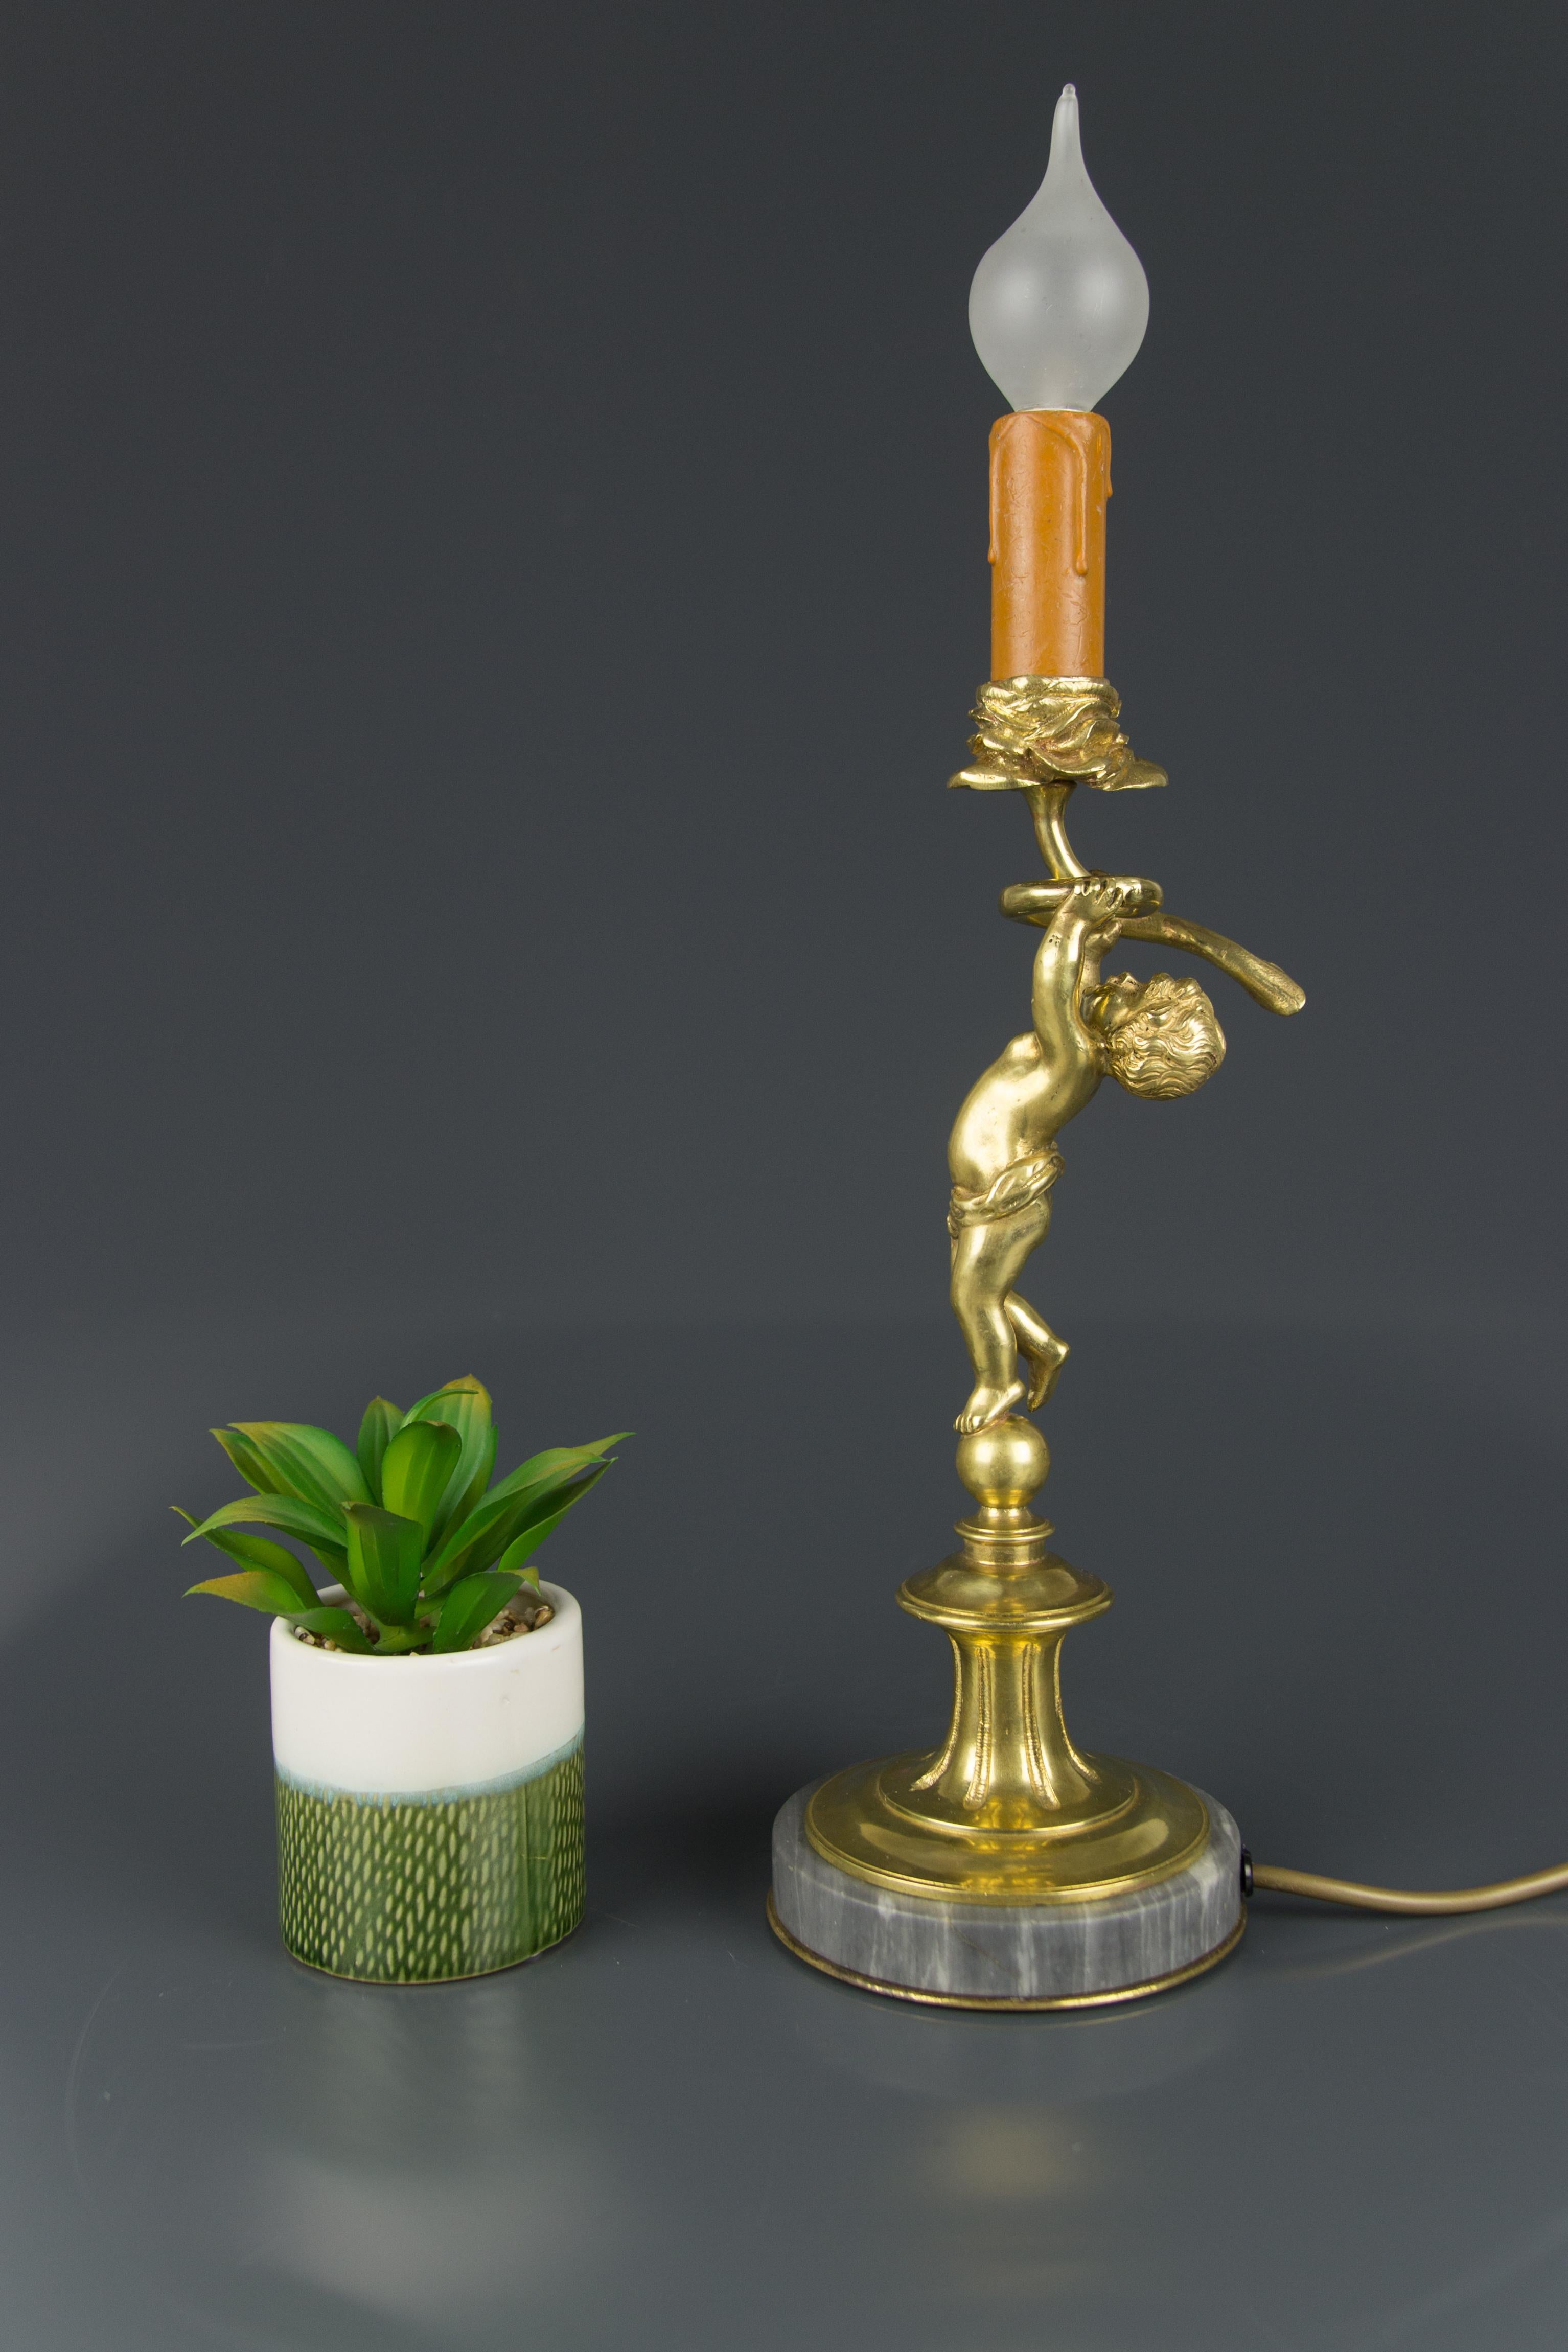 The adorable bronze table lamp features a bronze figure of a cherub raised on a circular gray marble base and holding a flower candle.
One socket for the E14 size light bulb.
The lamp can be safely used in the USA as well, it will be shipped with an